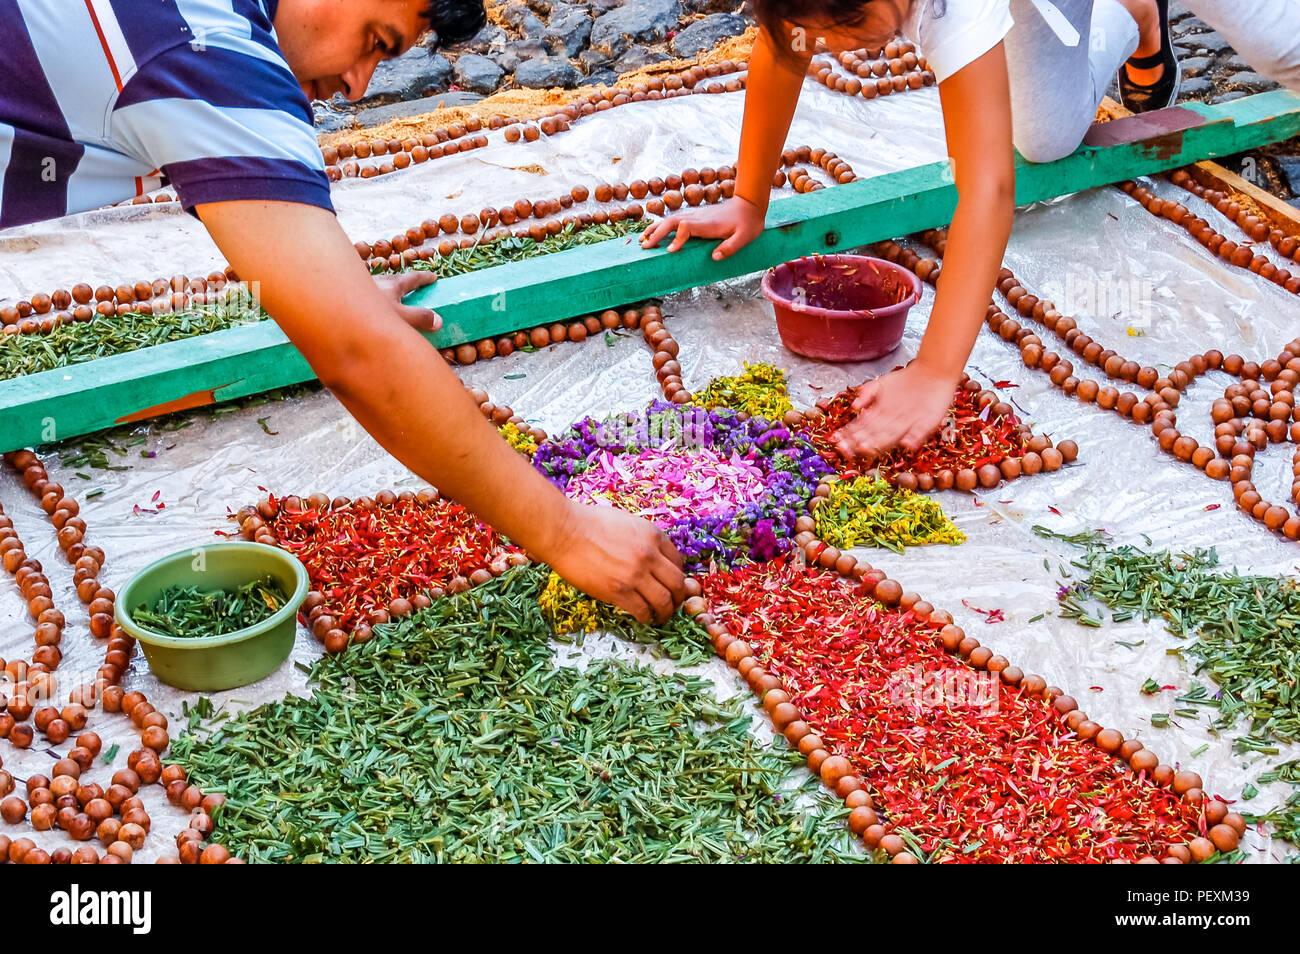 Antigua, Guatemala -  April 10, 2009: Making Good Friday procession carpet in UNESCO World Heritage Site with famous Holy Week celebrations. Stock Photo